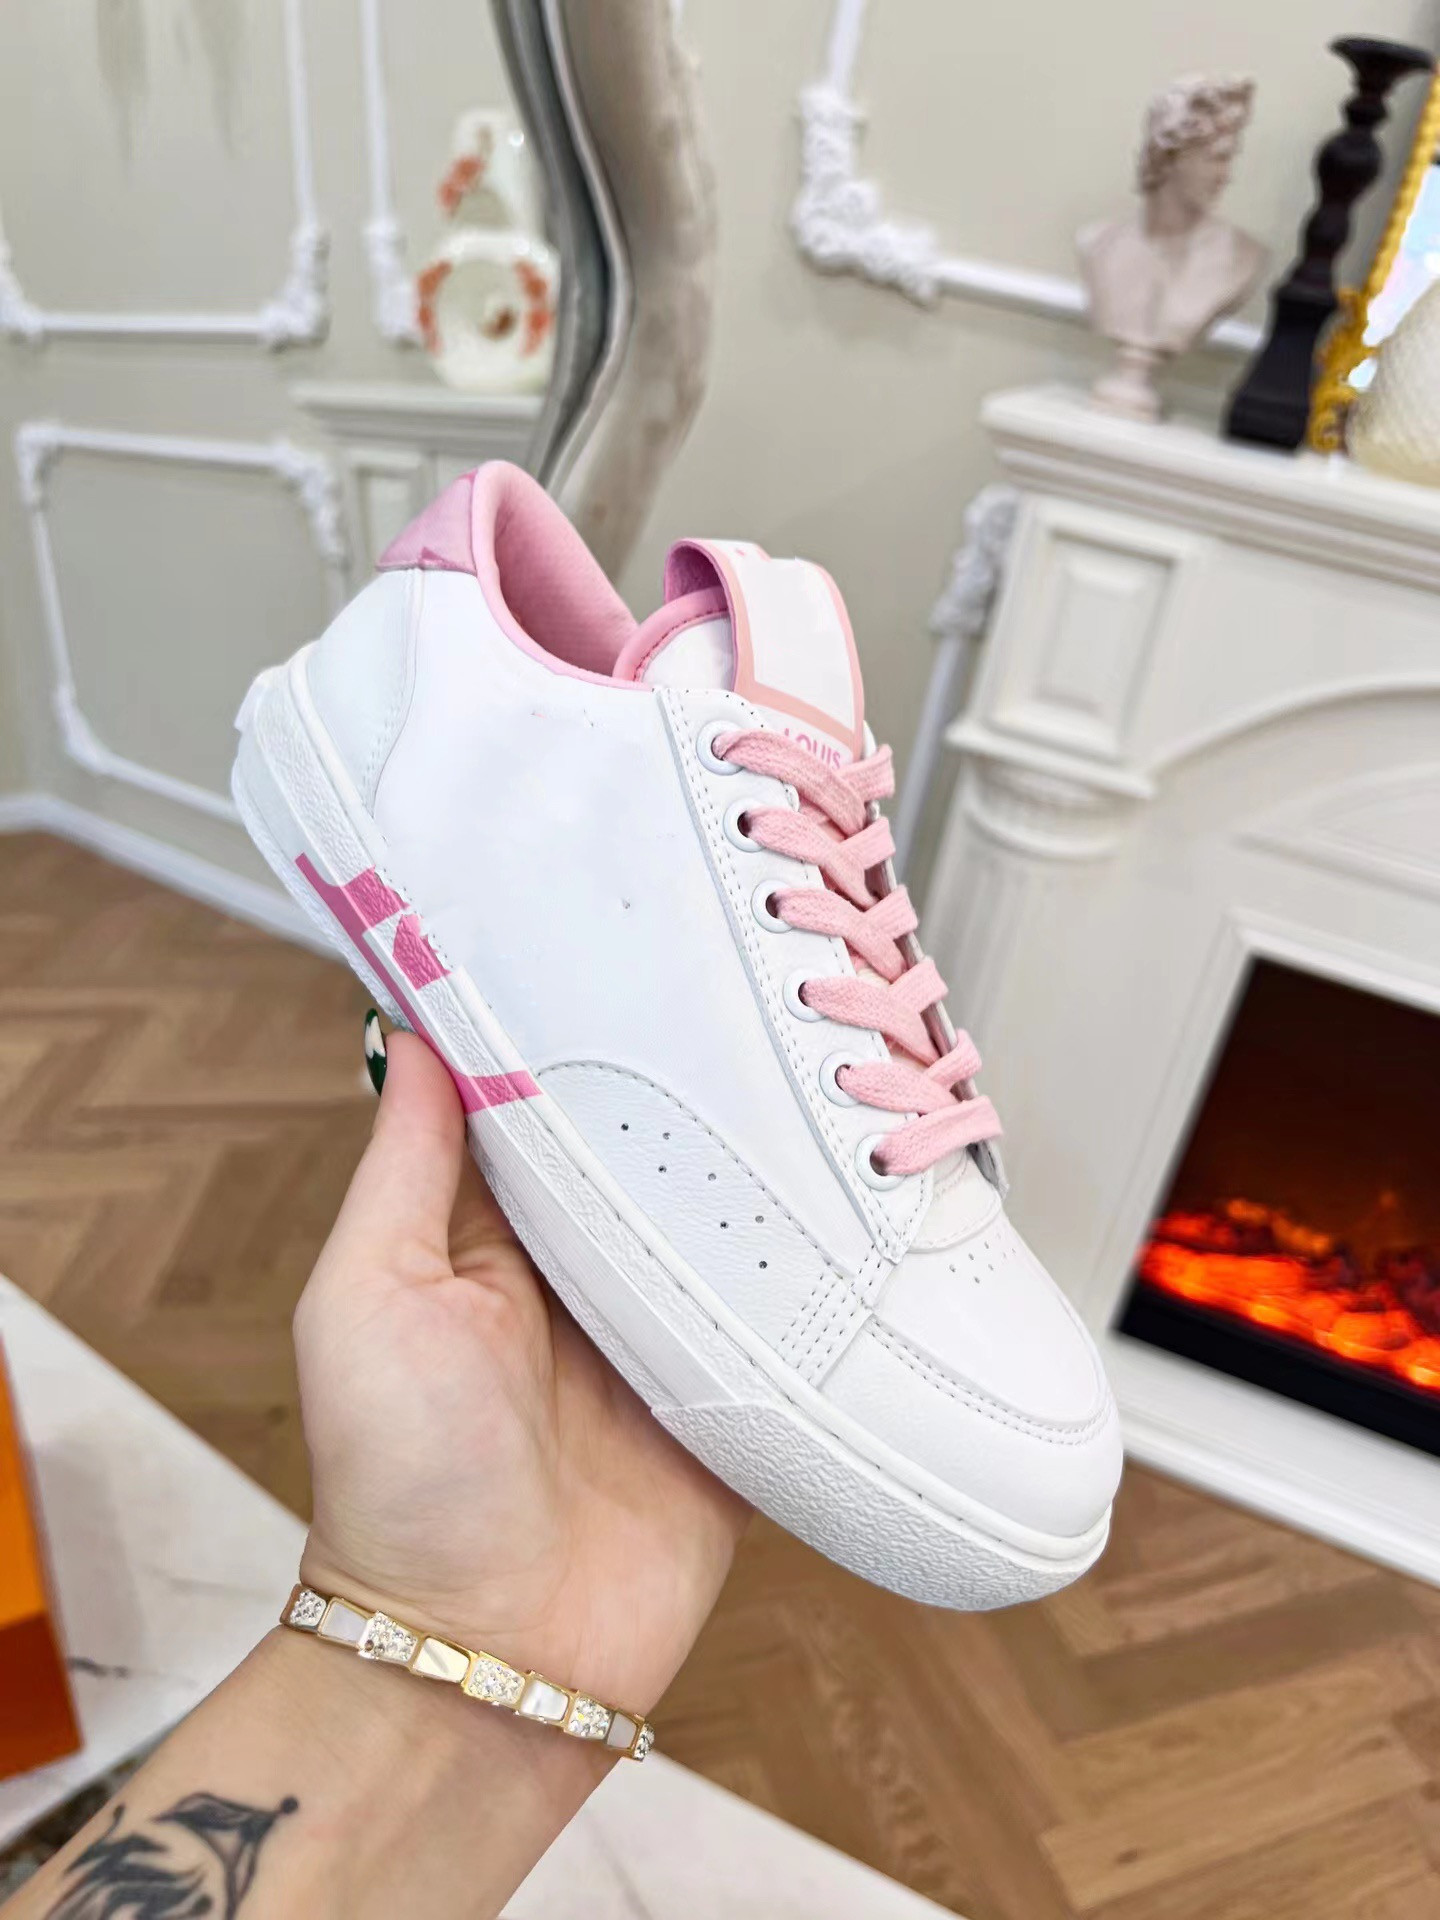 

New top Designer Mens Causal Shoes Fashion Woman Leather Lace Up Platform Sole Sneakers White men women 0502, 02